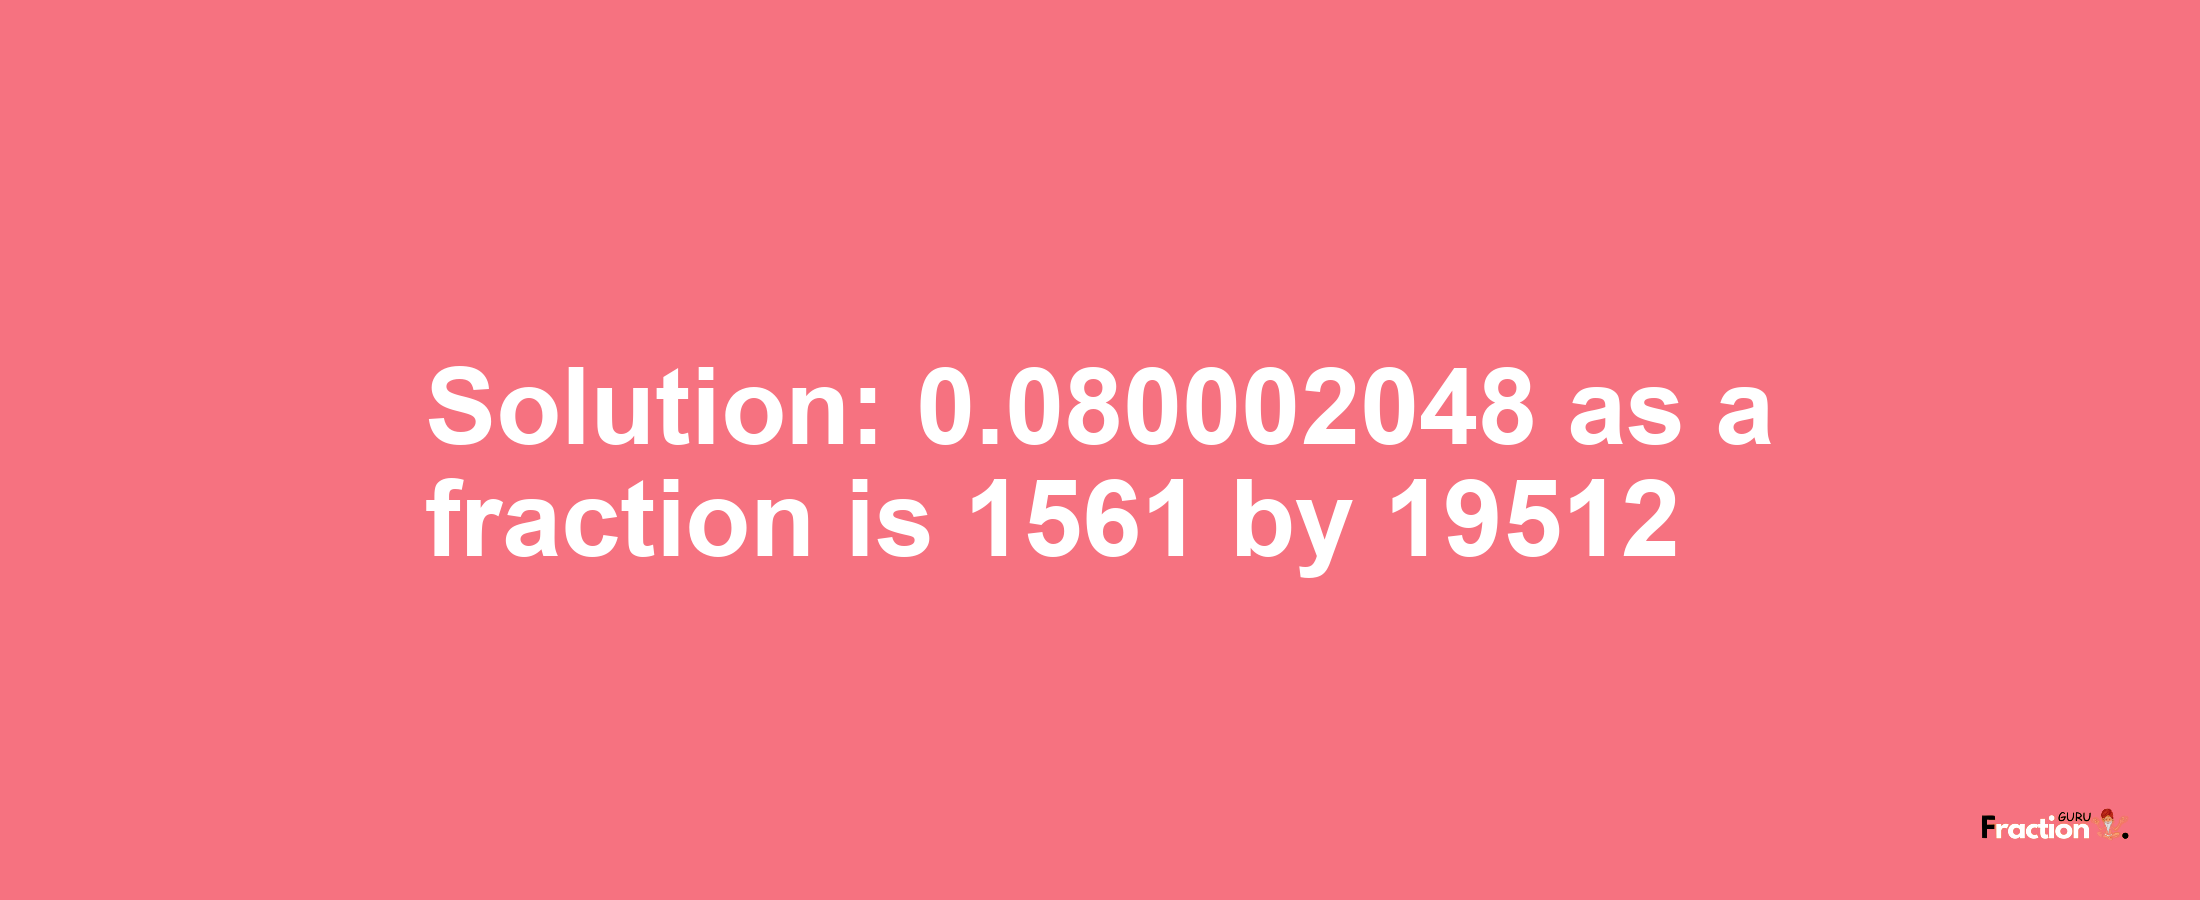 Solution:0.080002048 as a fraction is 1561/19512